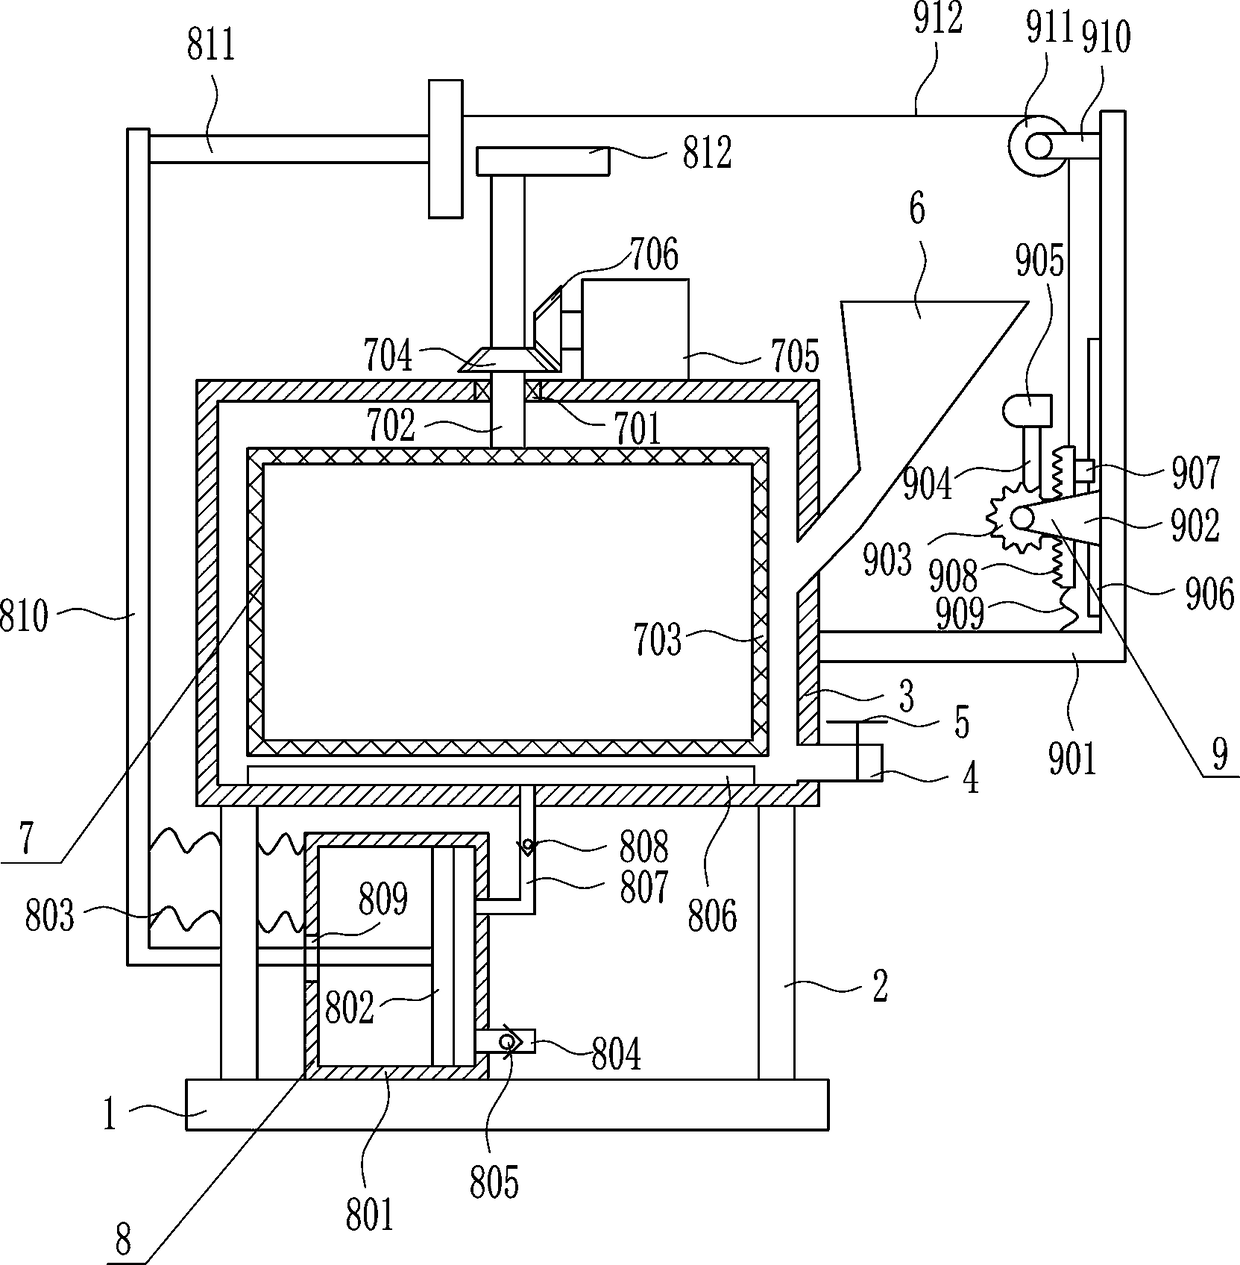 Chemical dye compounding device